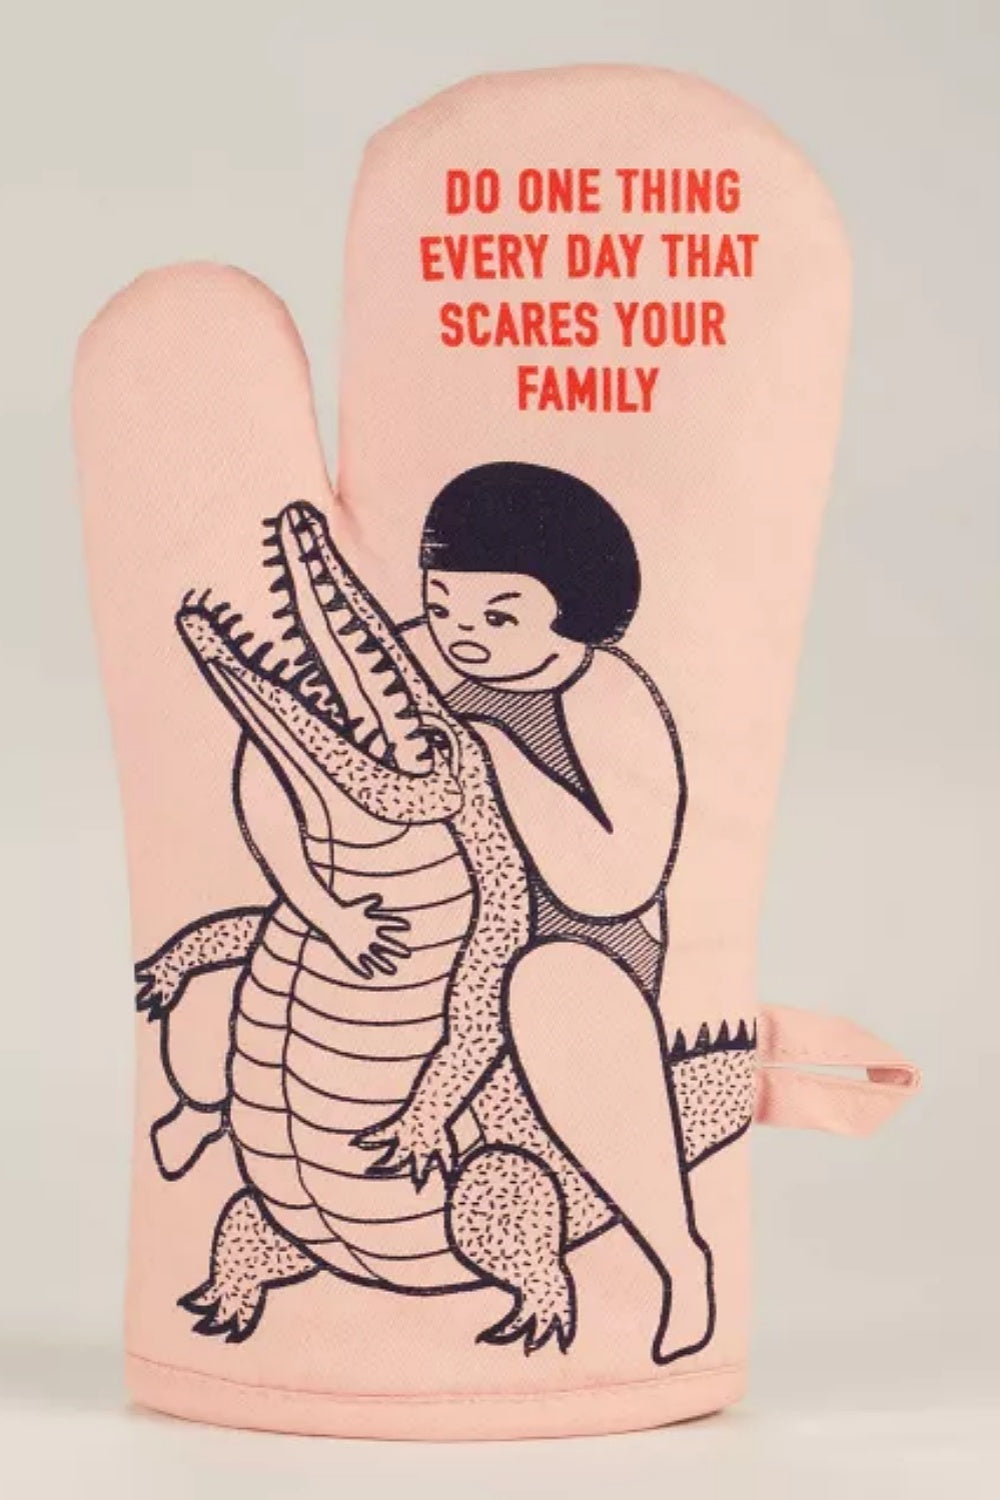 DO ONE THING EVERY DAY THAT SCARES YOUR FAMILY OVEN MITT